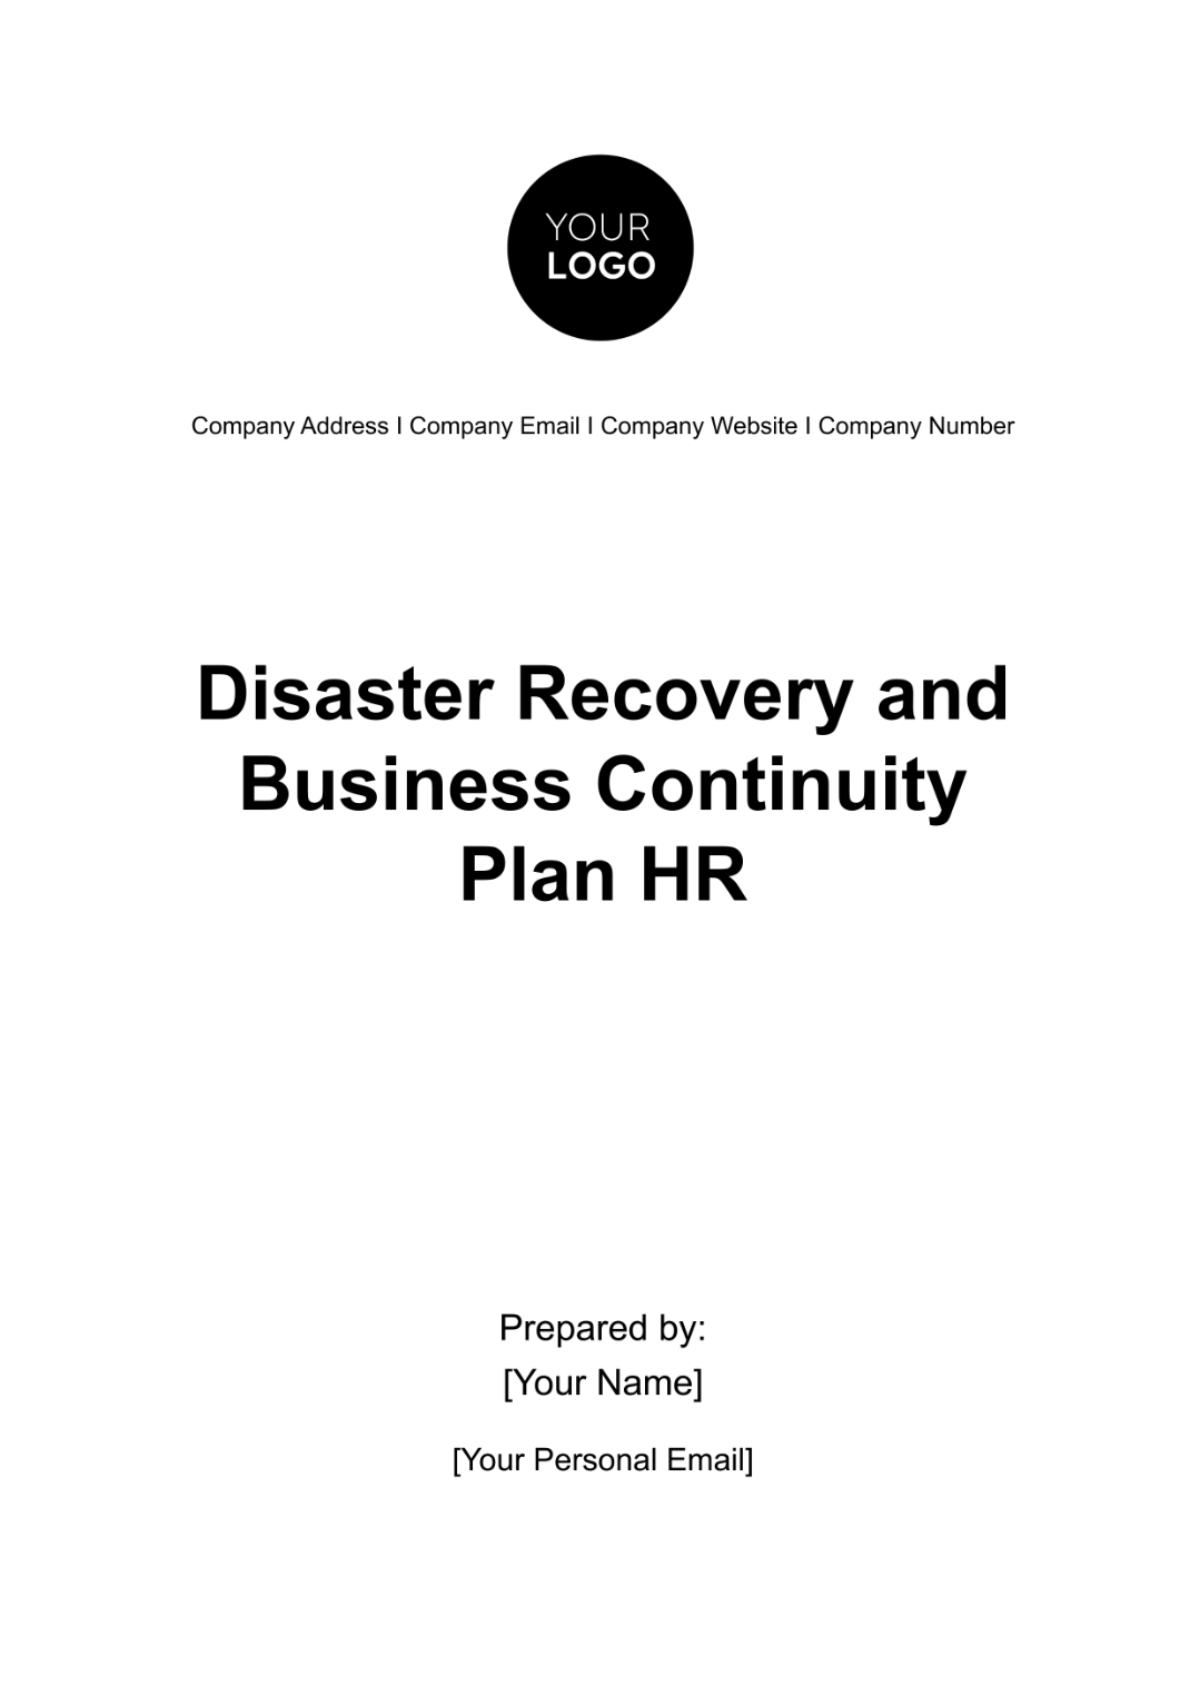 Free Disaster Recovery and Business Continuity Plan HR Template